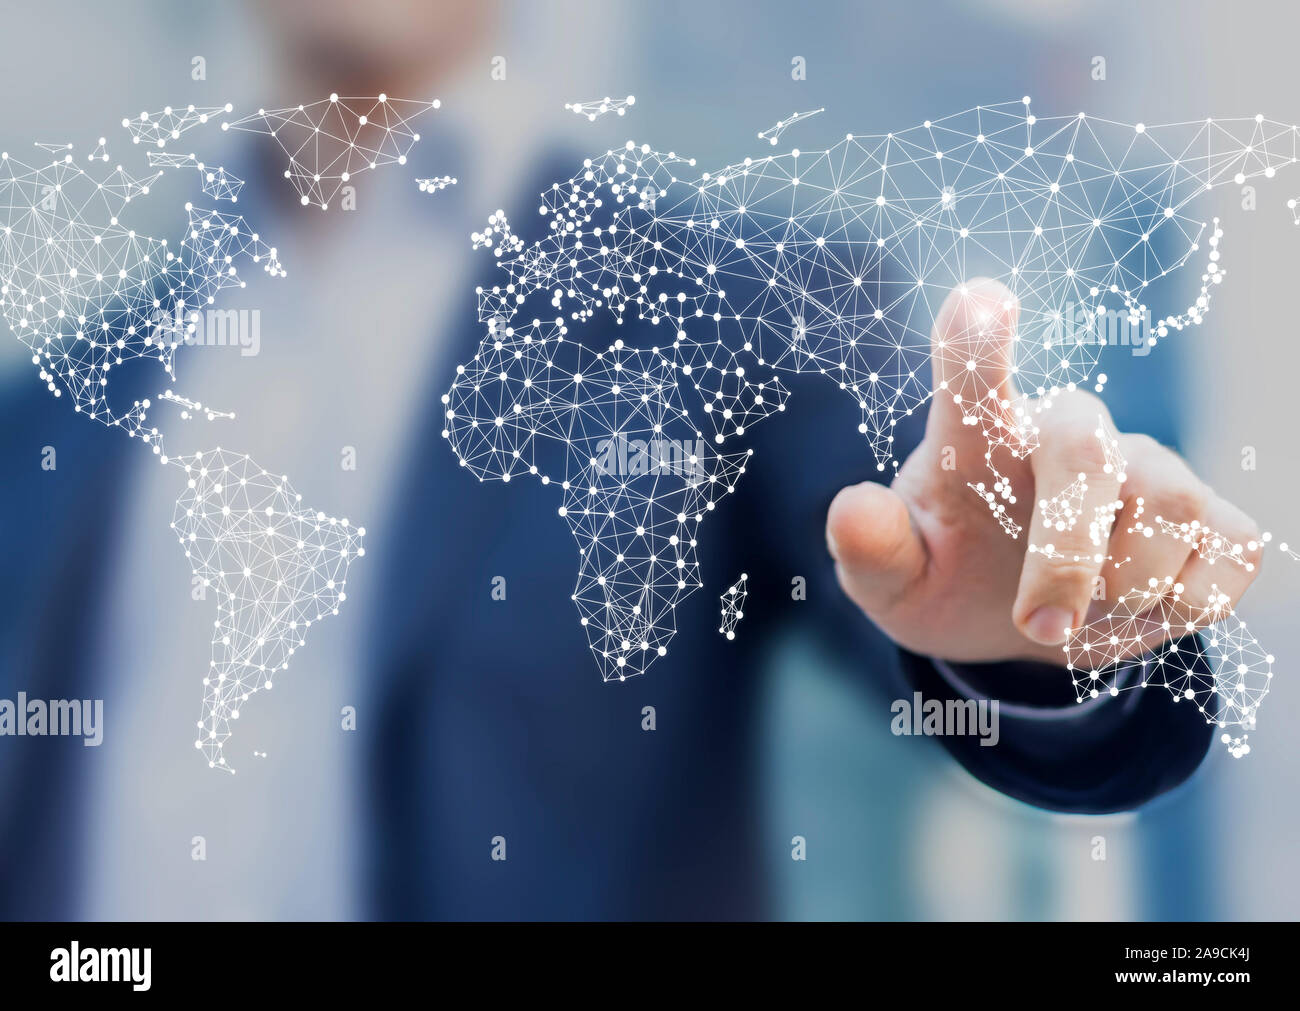 Global business and finance concept with businessman touching world map with connected dots in network architecture for telecommunication, internet of Stock Photo